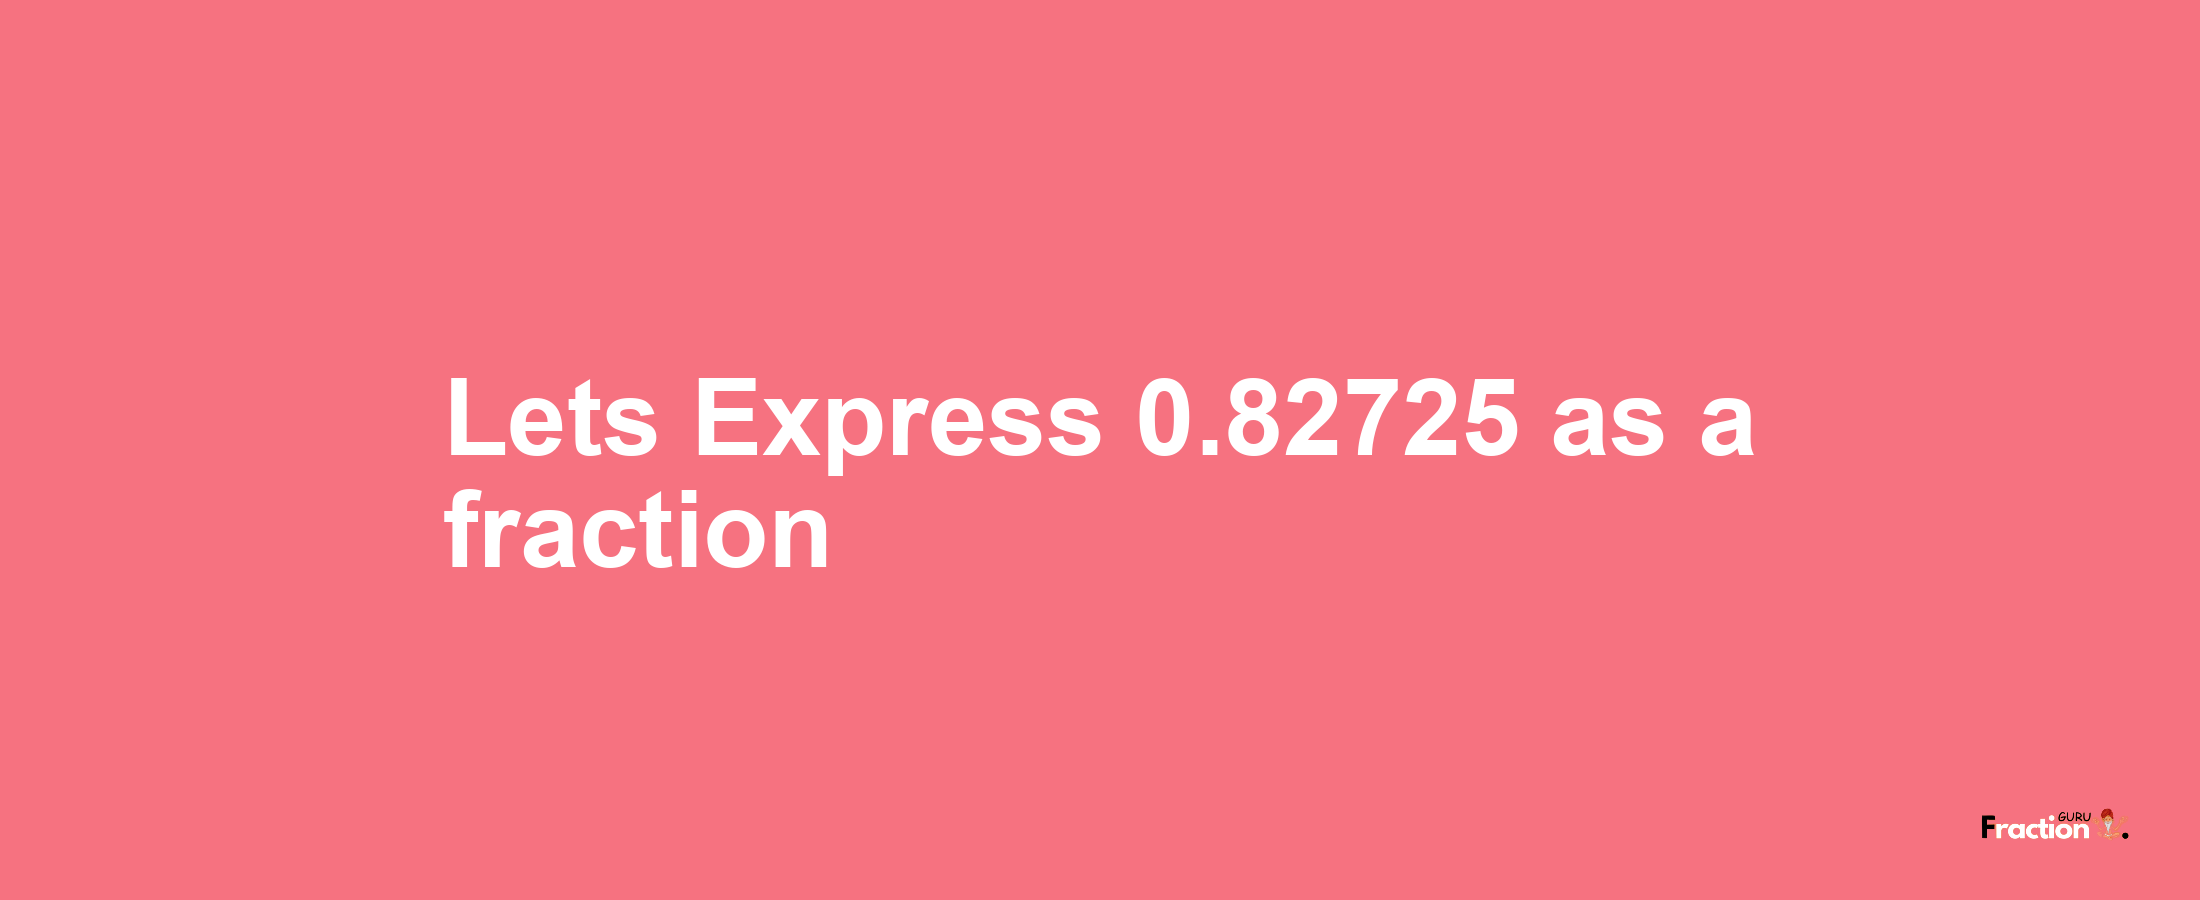 Lets Express 0.82725 as afraction